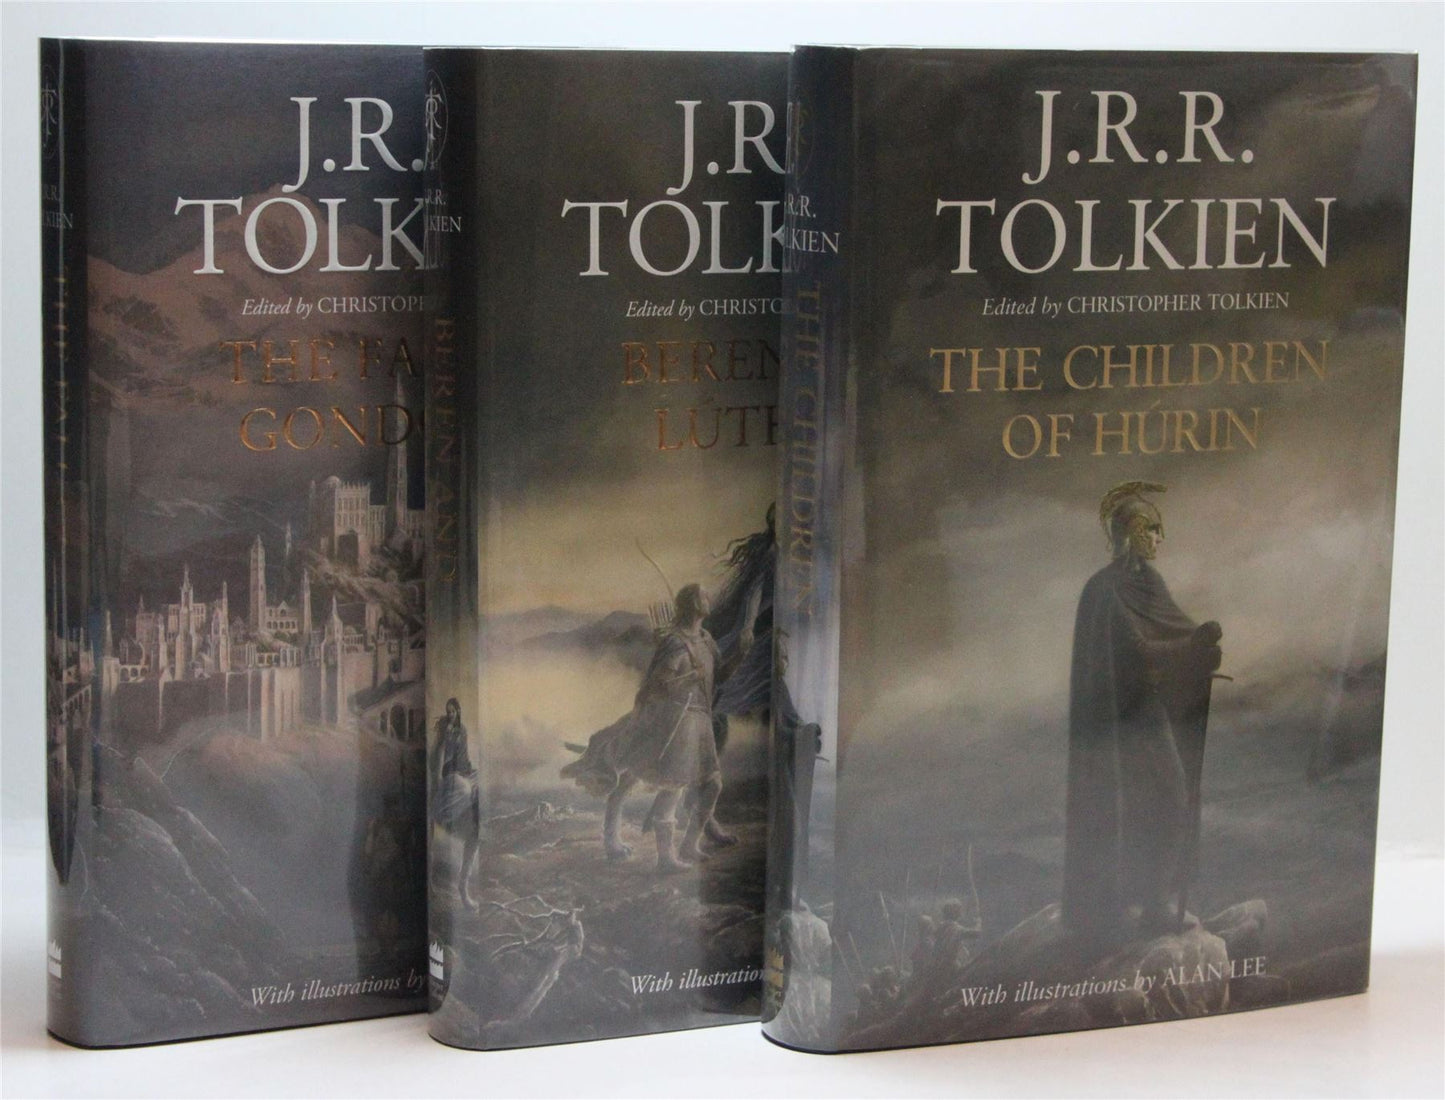 The Three 'Great Tales' - The Children of Hurin, Beren And Luthien, & The Fall of Gondolin